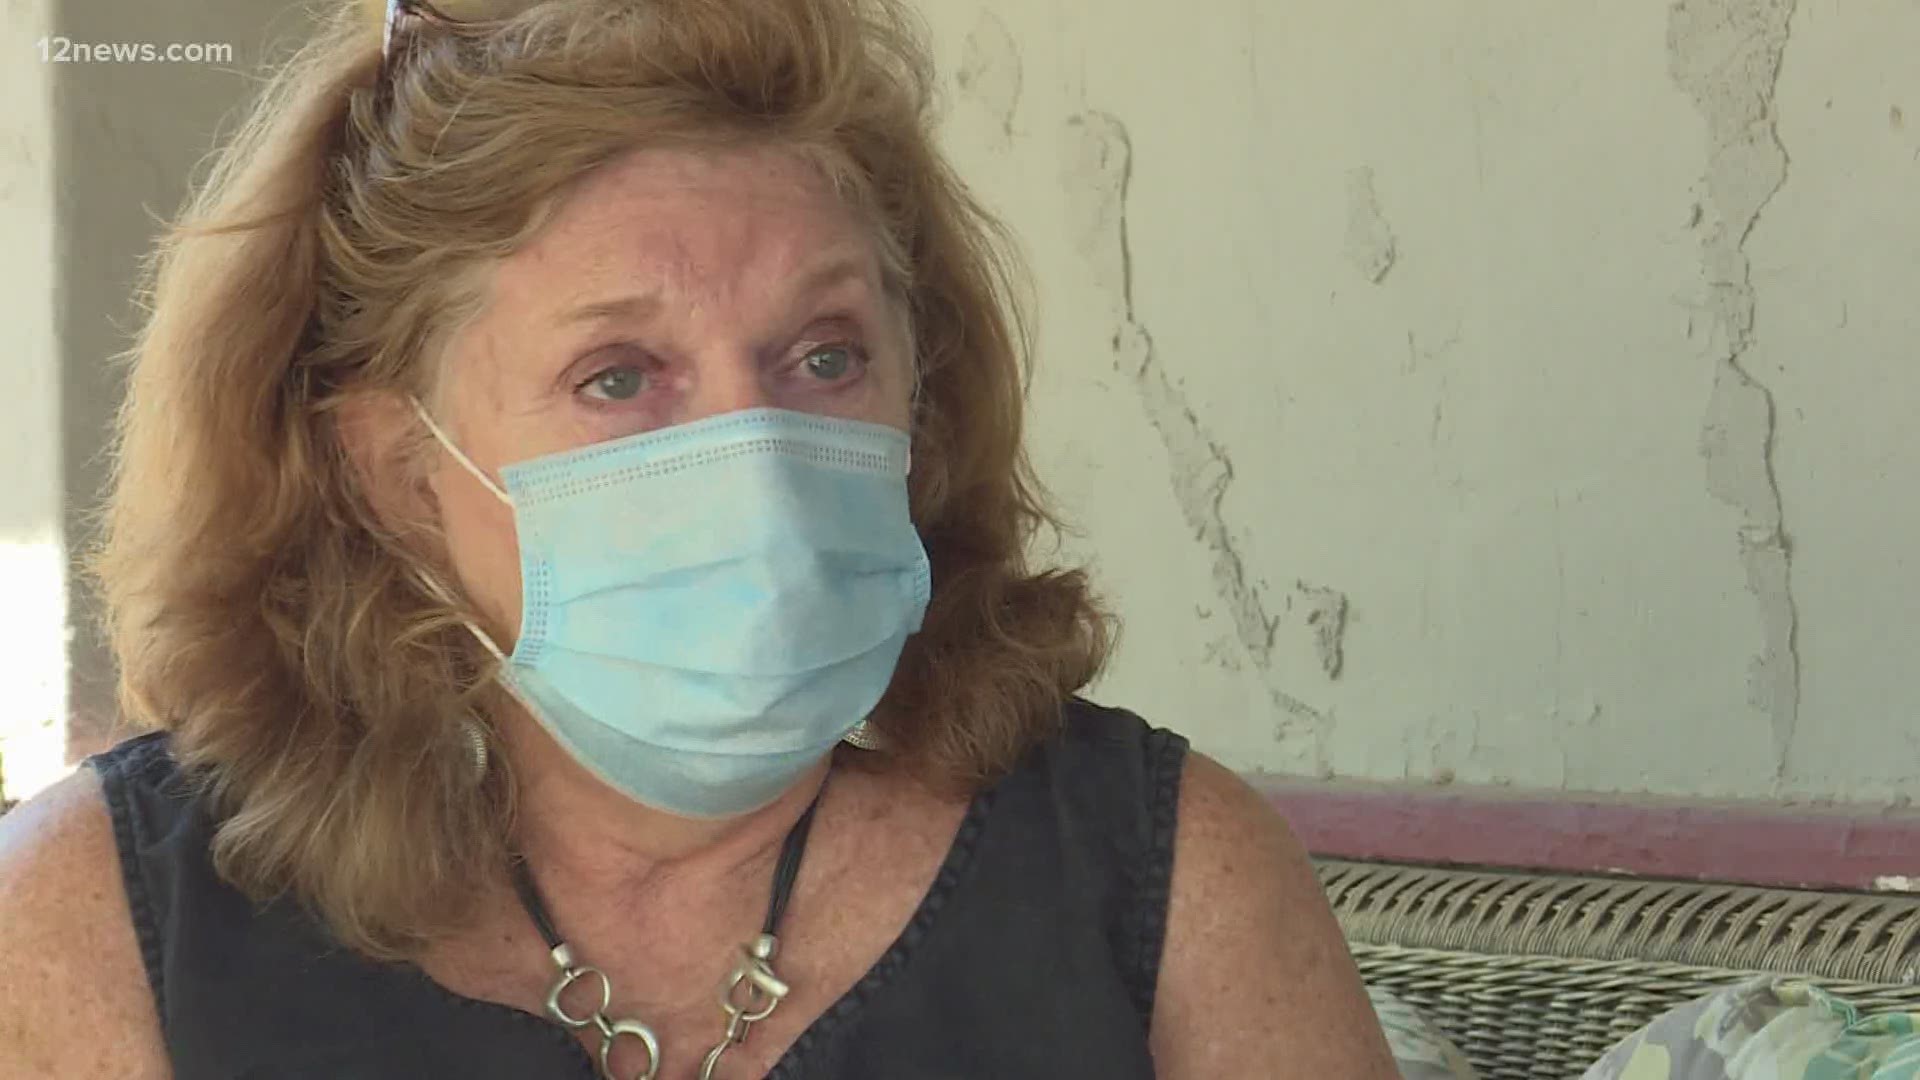 A Phoenix acupuncturist is struggling while she waits for pandemic unemployment assistance. Many Arizonans are still waiting for money they need to live on.